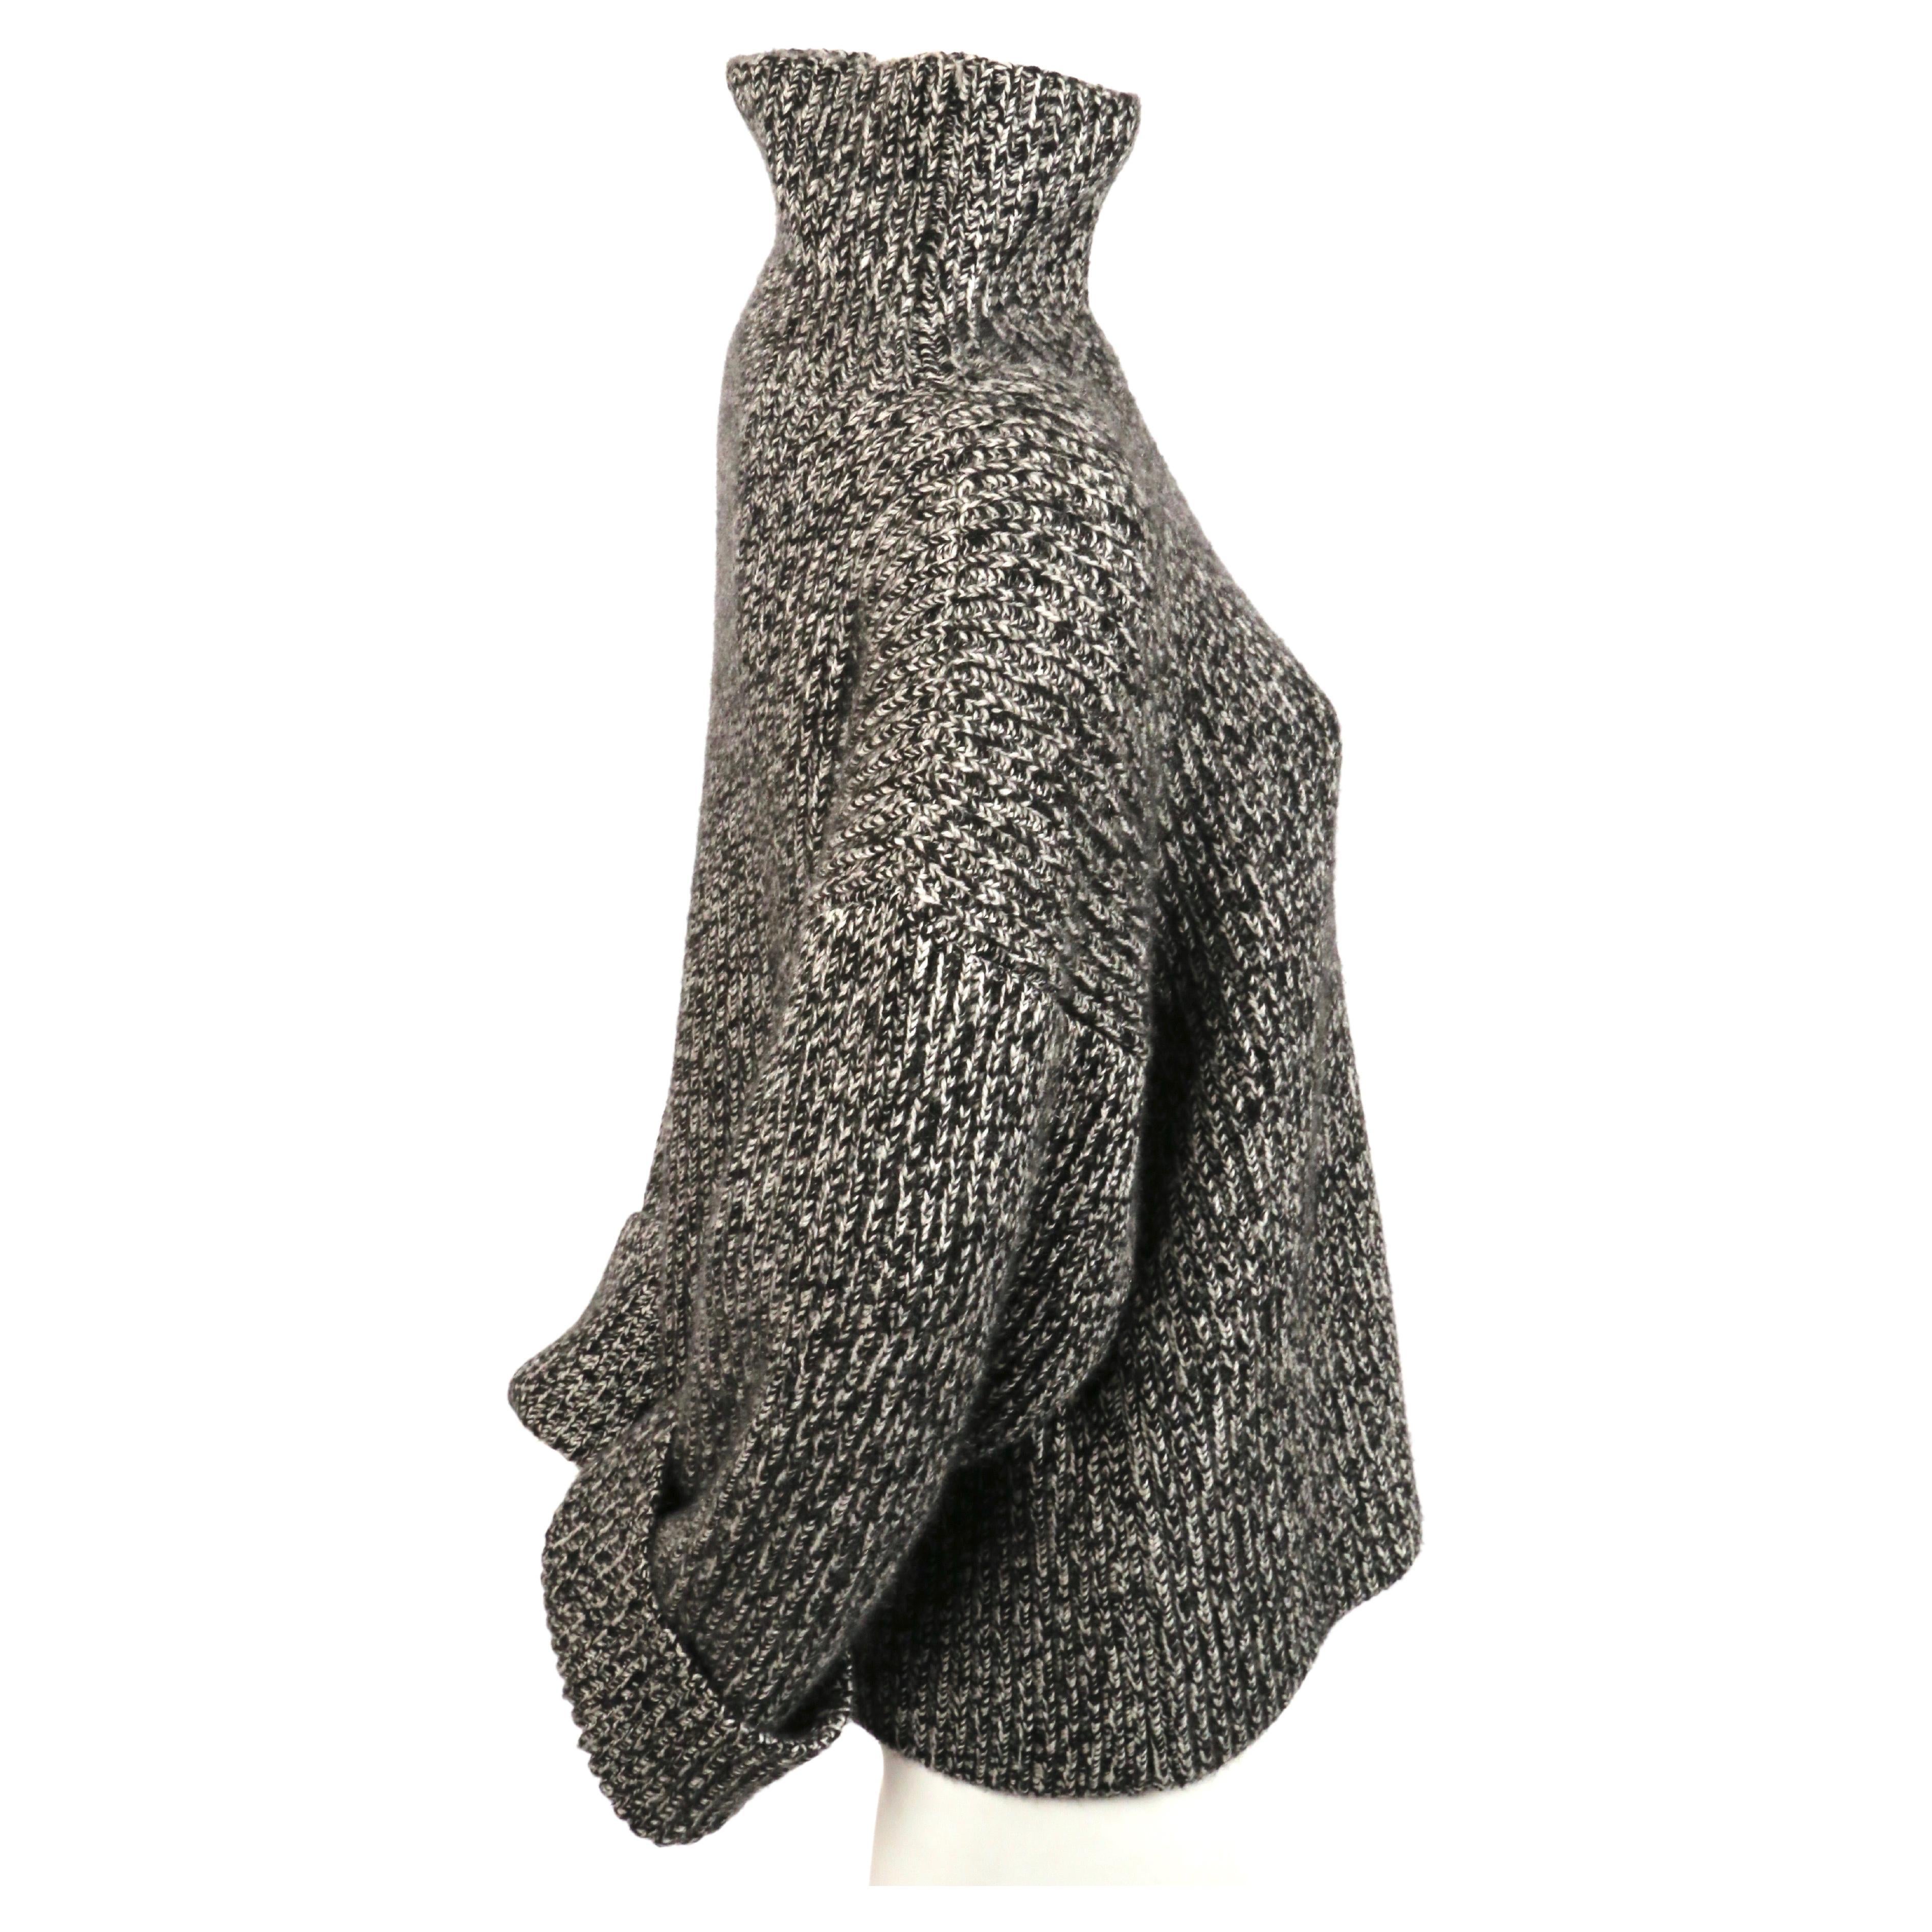 CELINE by PHOEBE PHILO black cashmere turtleneck sweater with underarm cutouts In New Condition In San Fransisco, CA